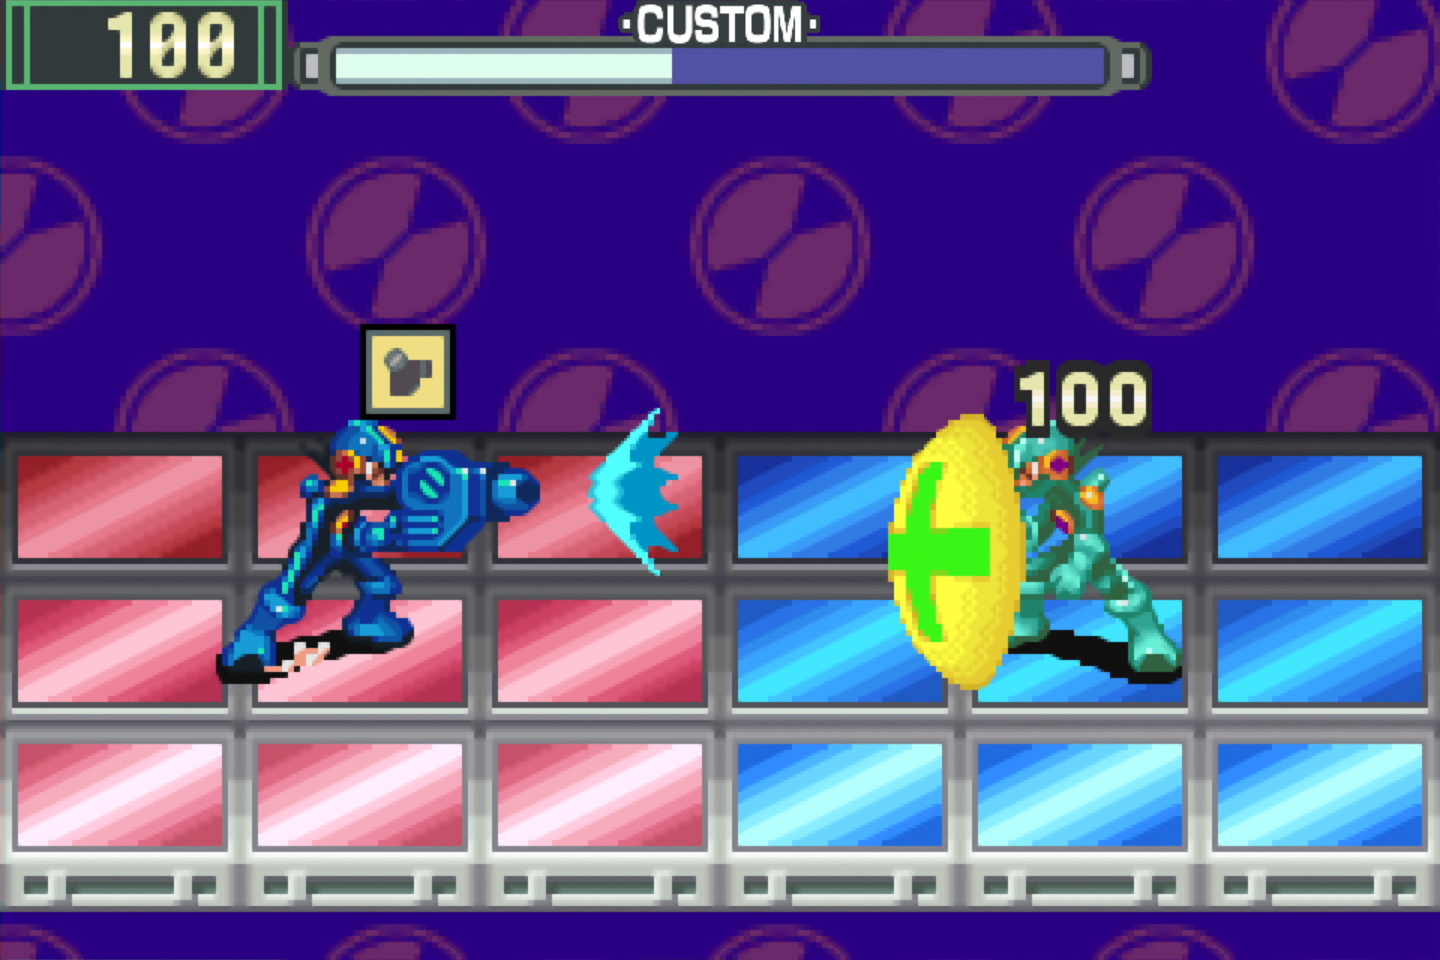 Mega Man Battle Network Legacy Collection - New features, online functions,  and more